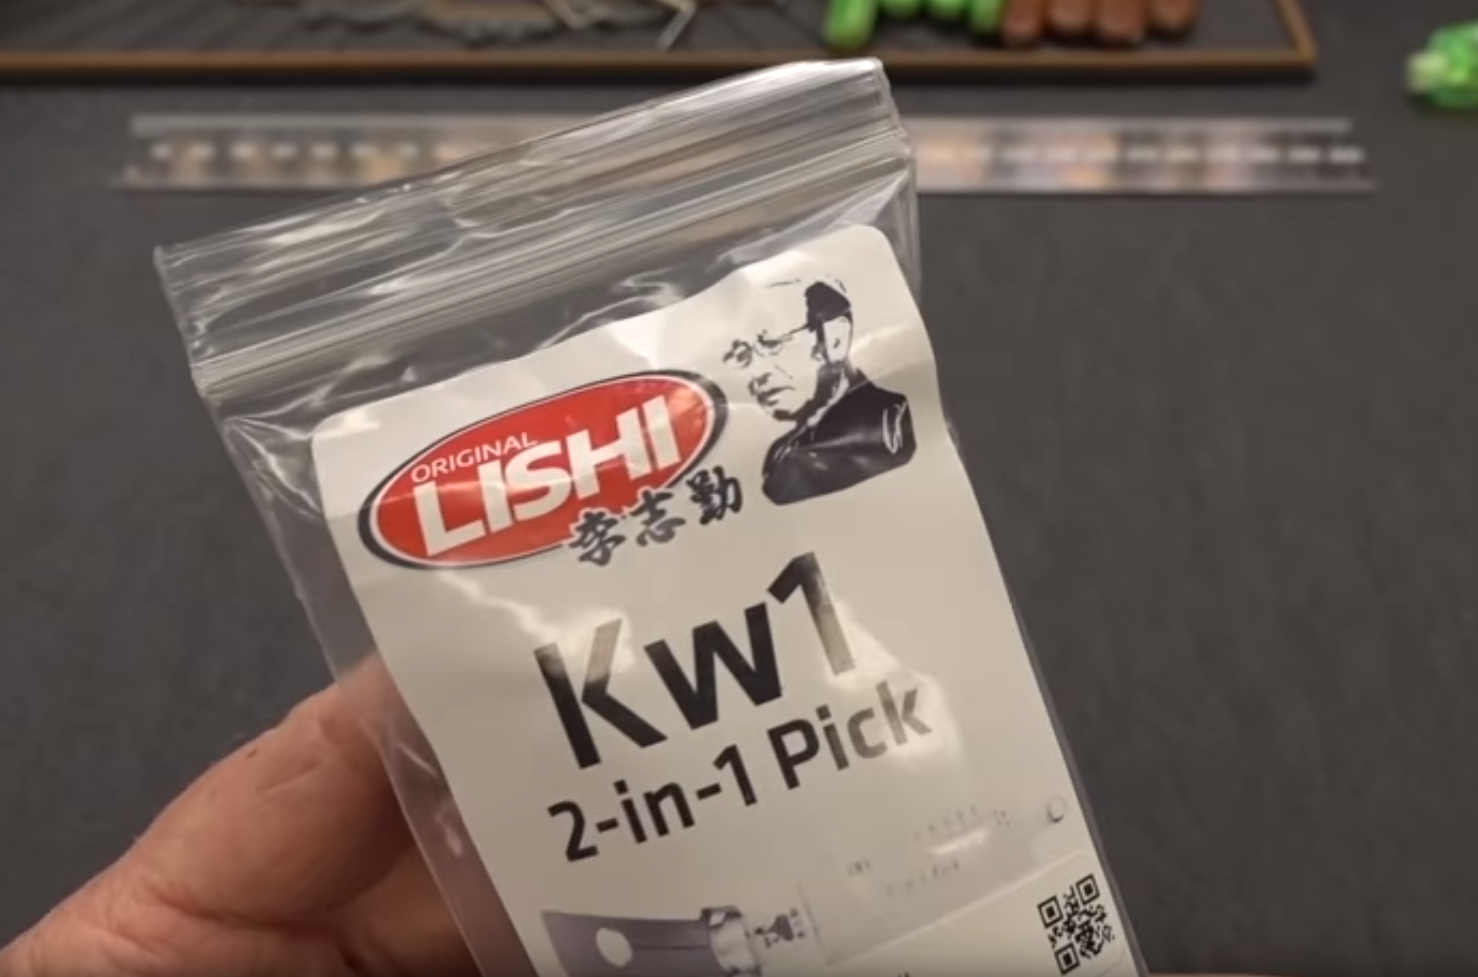 (1463) Review: Lishi KW1 2-in-1 Pick & Decoder